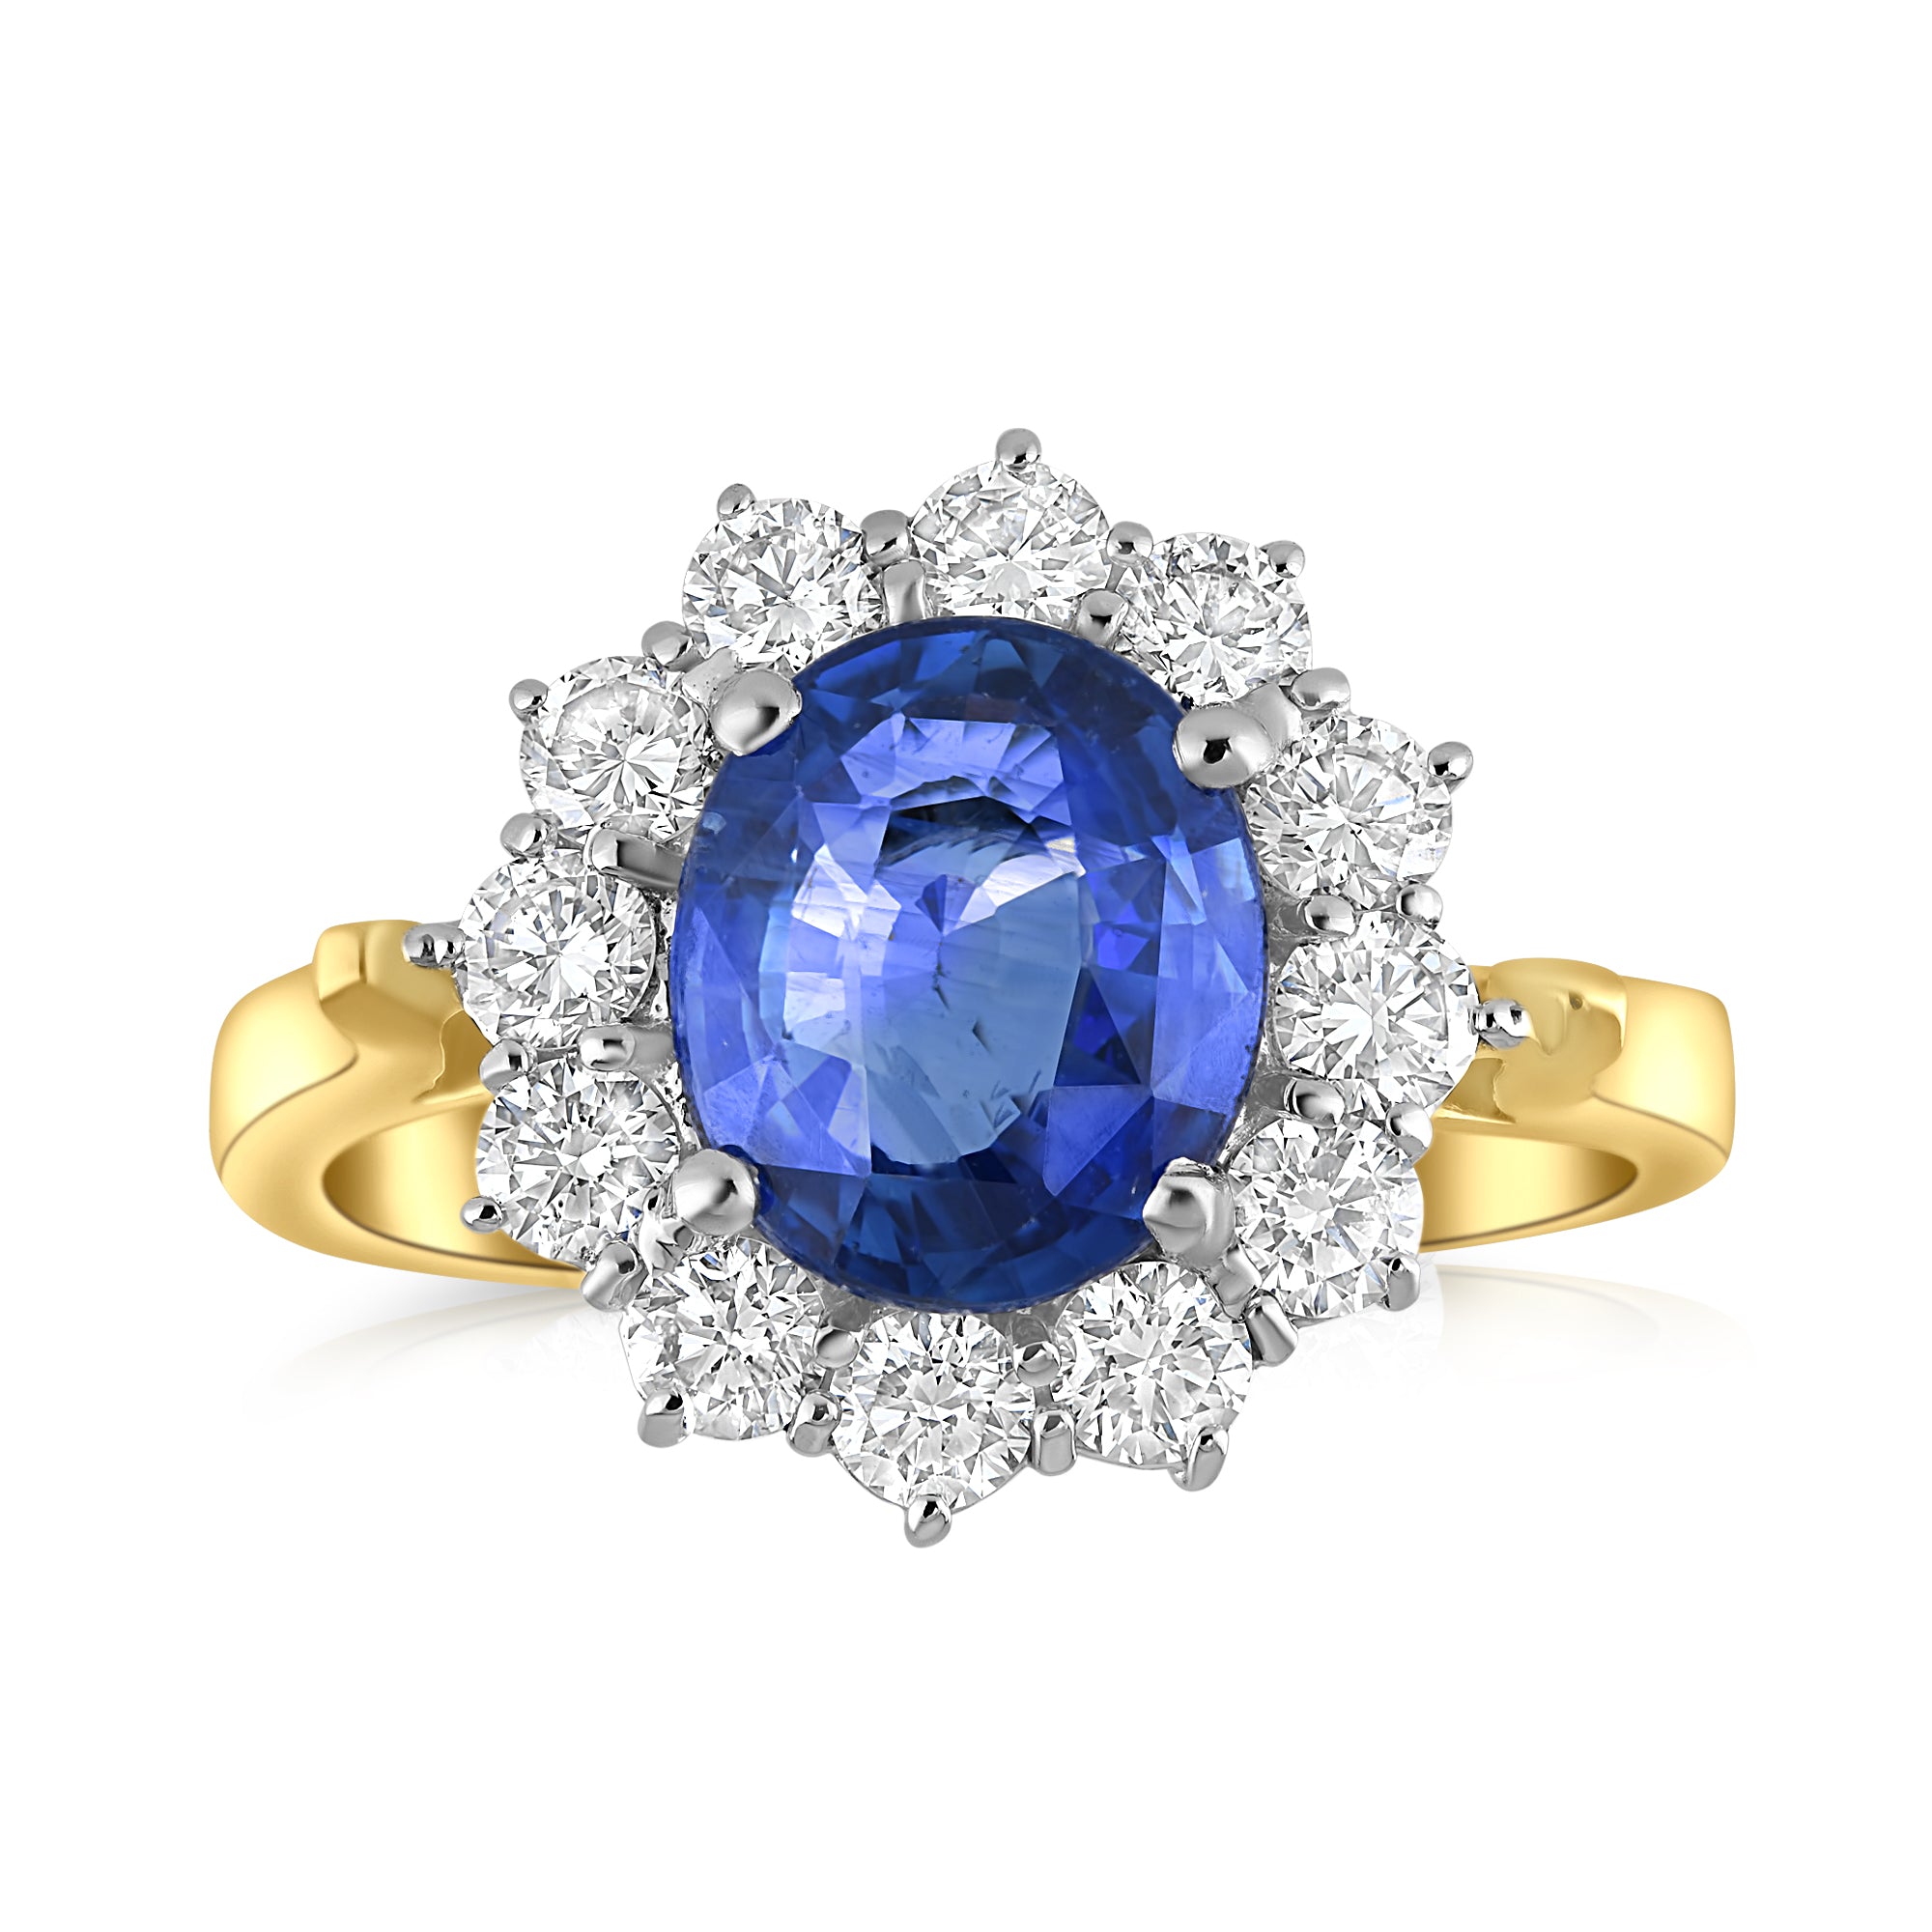 3.31ct sapphire & diamond cluster ring set in 18ct white & yellow gold